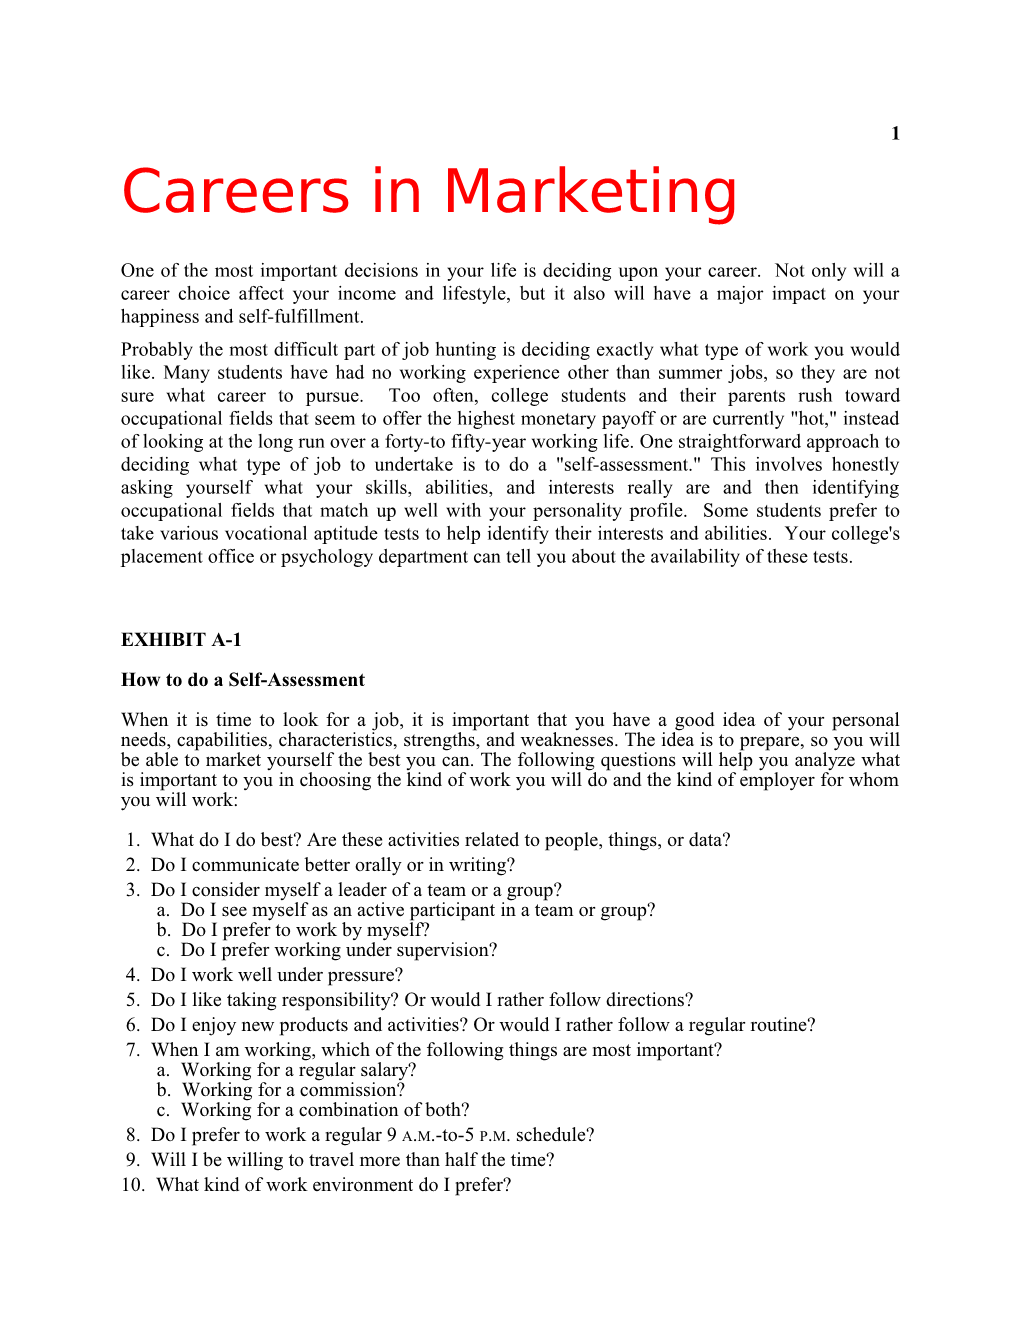 Starting Your Career in Marketing